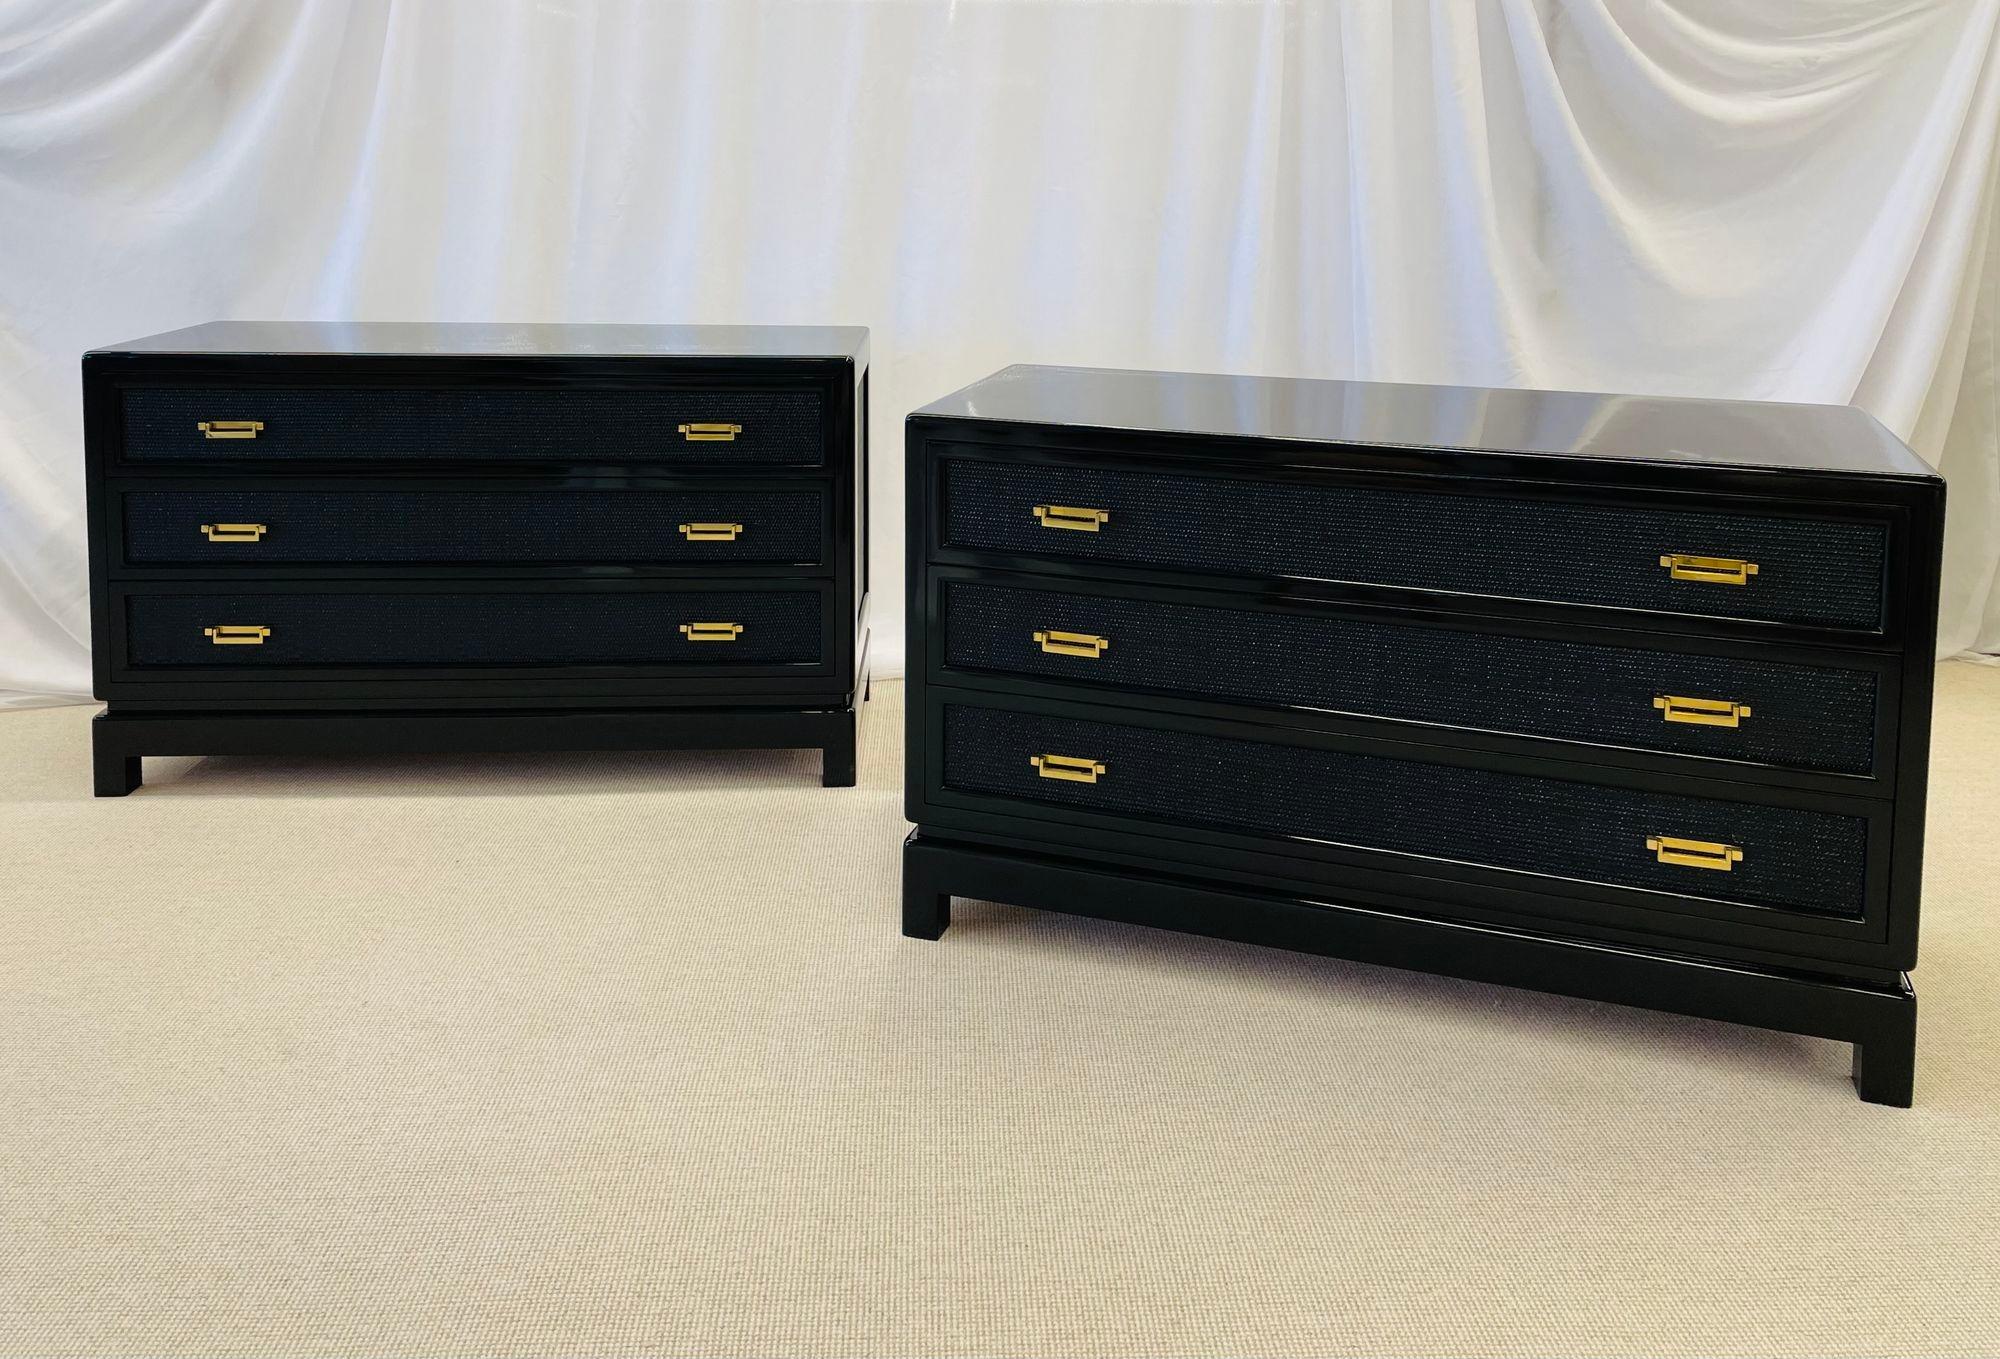 Pair of Mid-Century Modern Cabinets, Chests, Nightstands, Karl Springer Style In Good Condition For Sale In Stamford, CT